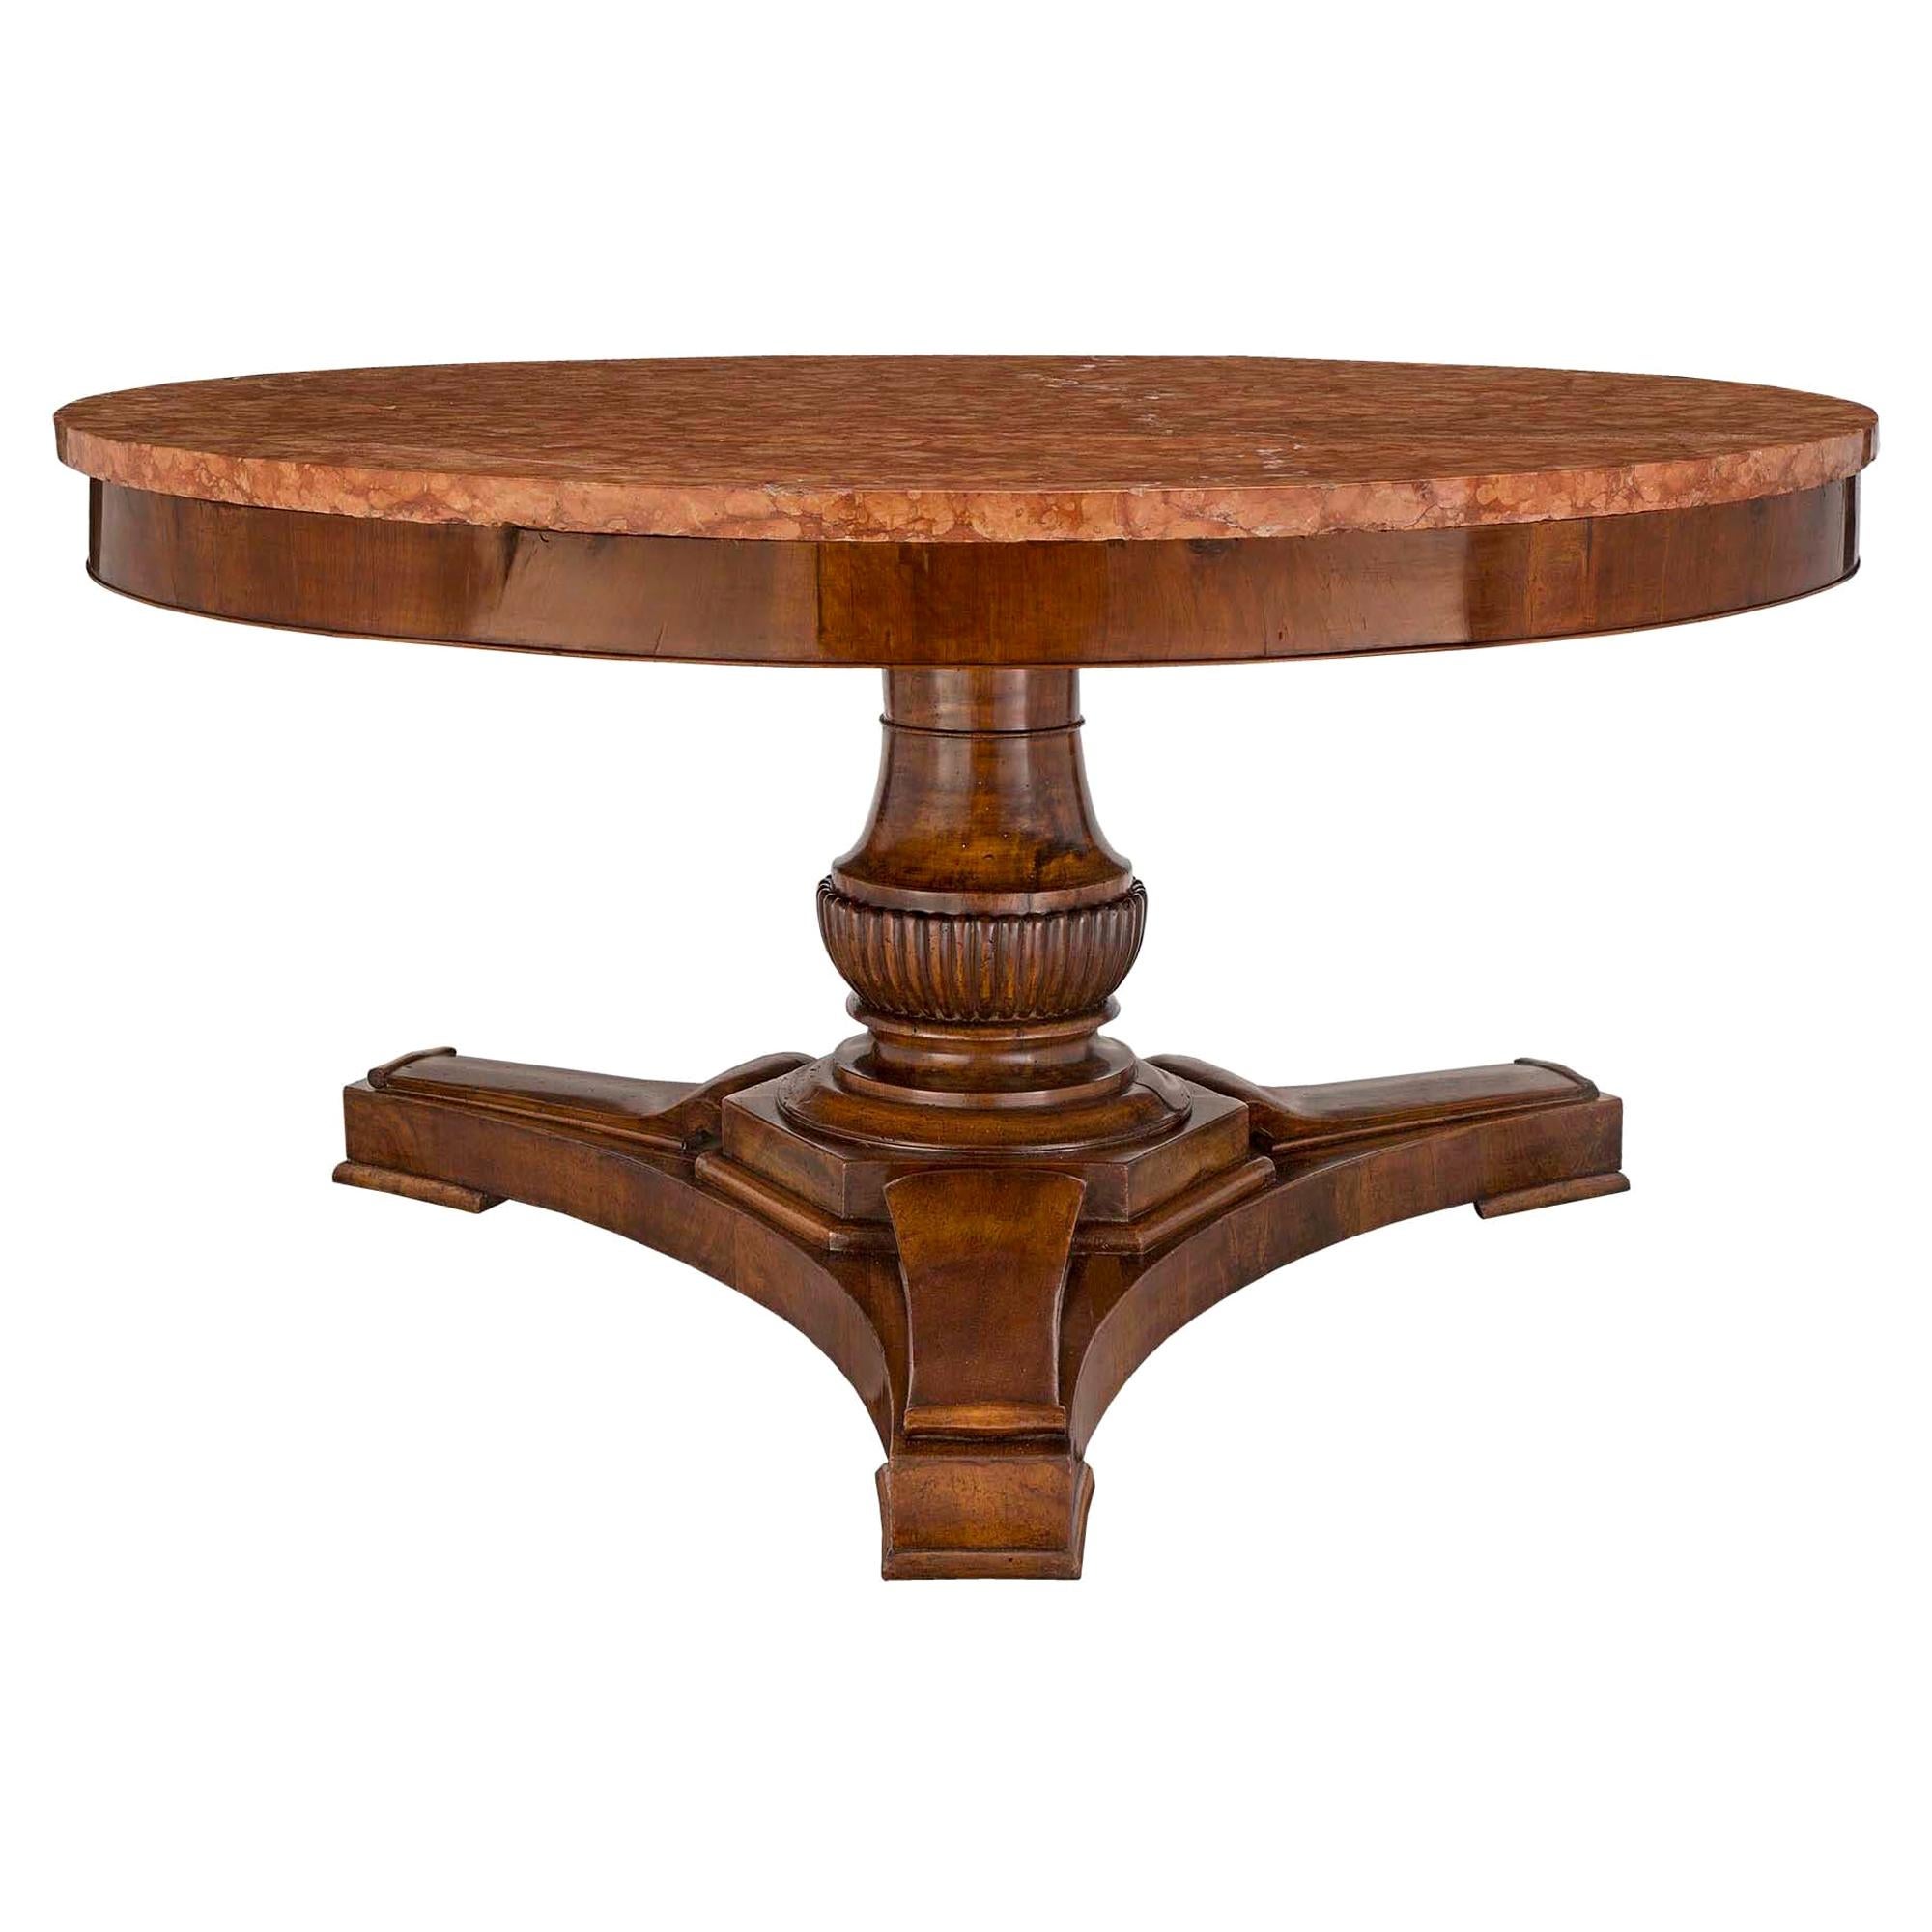 Italian 18th Century Walnut and Marble Tuscan Center Table